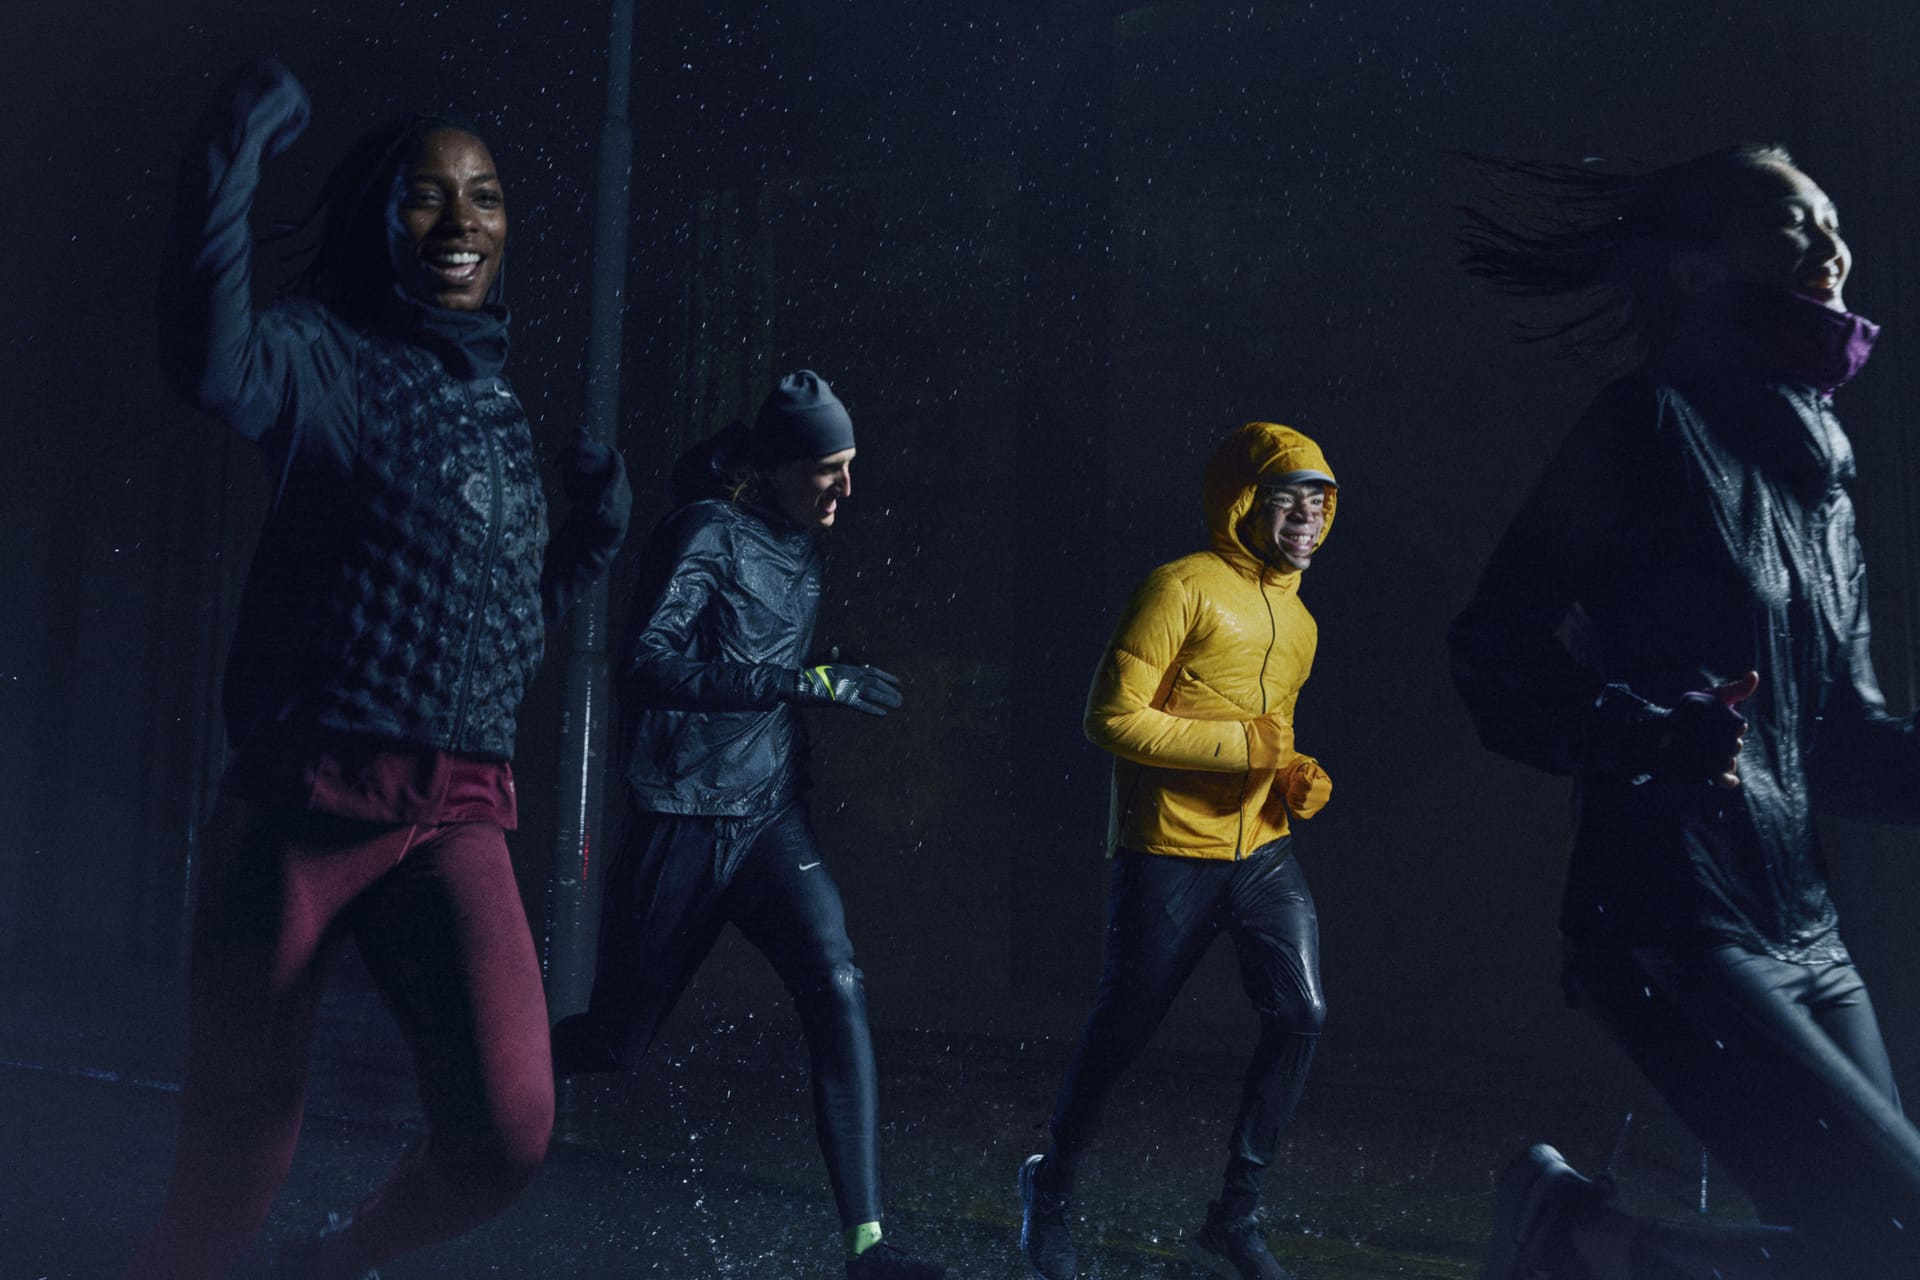 nike cold weather running jacket